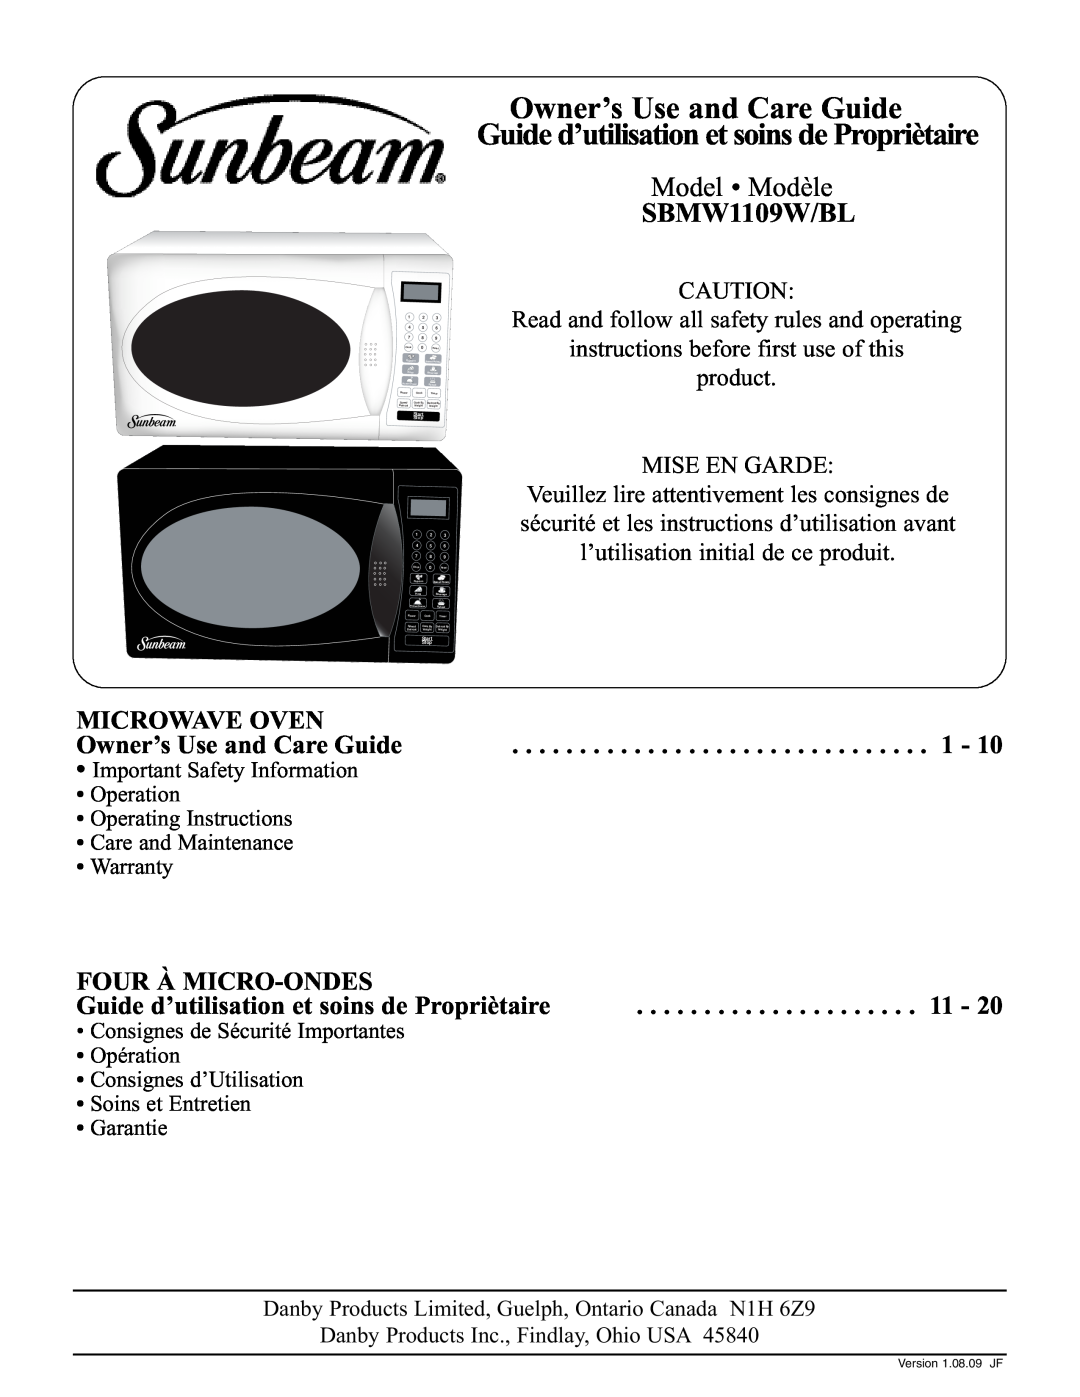 Sunbeam SBMW1109W/BL operating instructions Model Modèle, Microwave Oven, Owner’s Use and Care Guide, Four À Micro-Ondes 